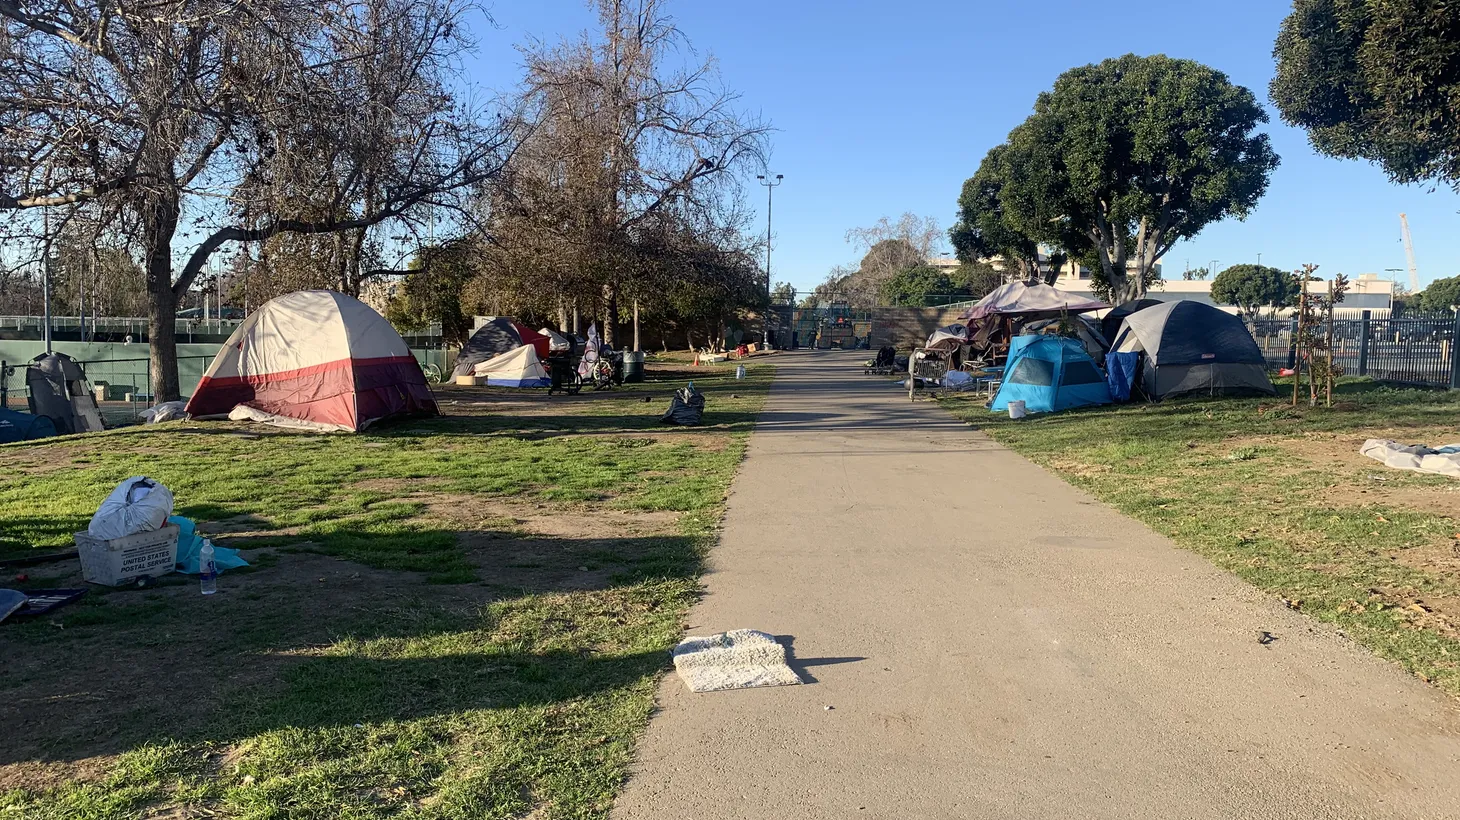 Westwood Park is one place where city officials have banned camping under a new law, though they’re not enforcing it yet.